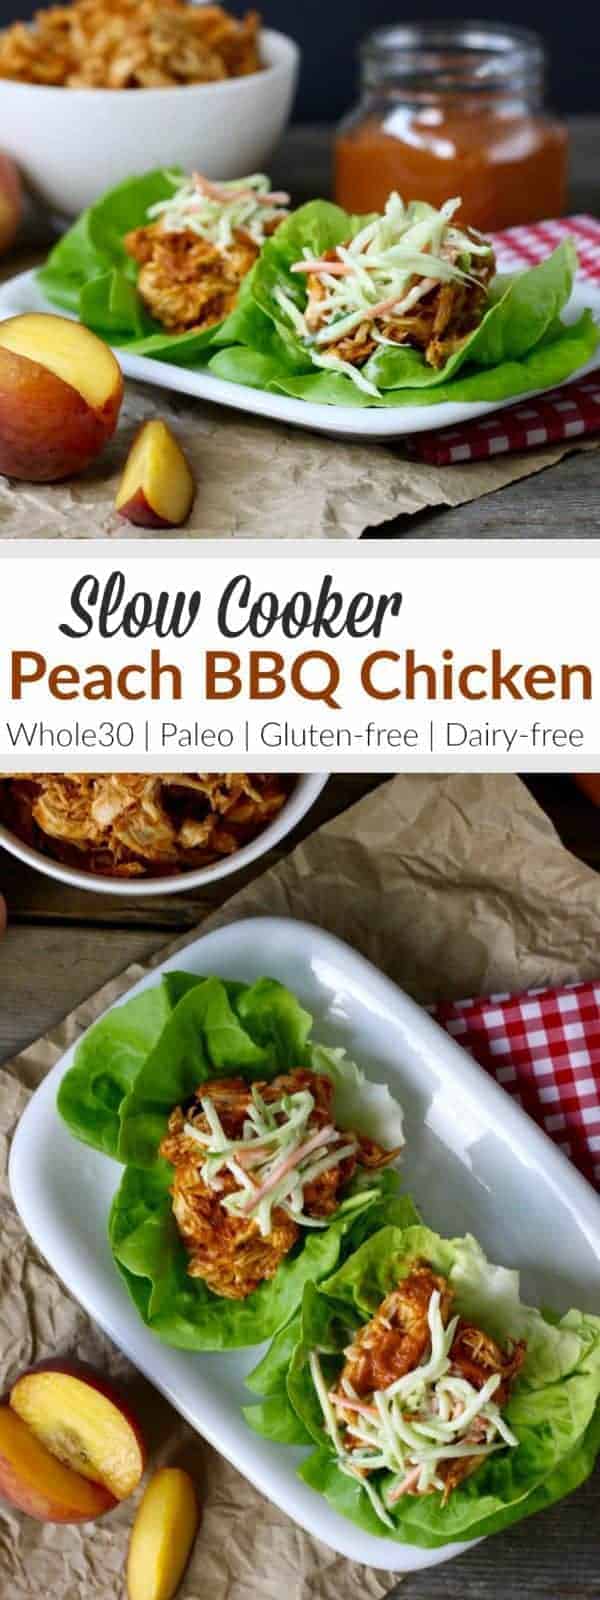 Get the flavor of a summertime barbecue from your slow cooker with this easy Slow Cooker Peach BBQ Chicken | Whole30 chicken recipes | Paleo chicken recipes | Grain-free chicken recipes | Gluten-free chicken recipes | Dairy-free chicken recipes | Whole30 slow cooker recipes | whole30 dinner recipes || The Real Food Dietitians #whole30dinner #healthyslowcooker #easydinners